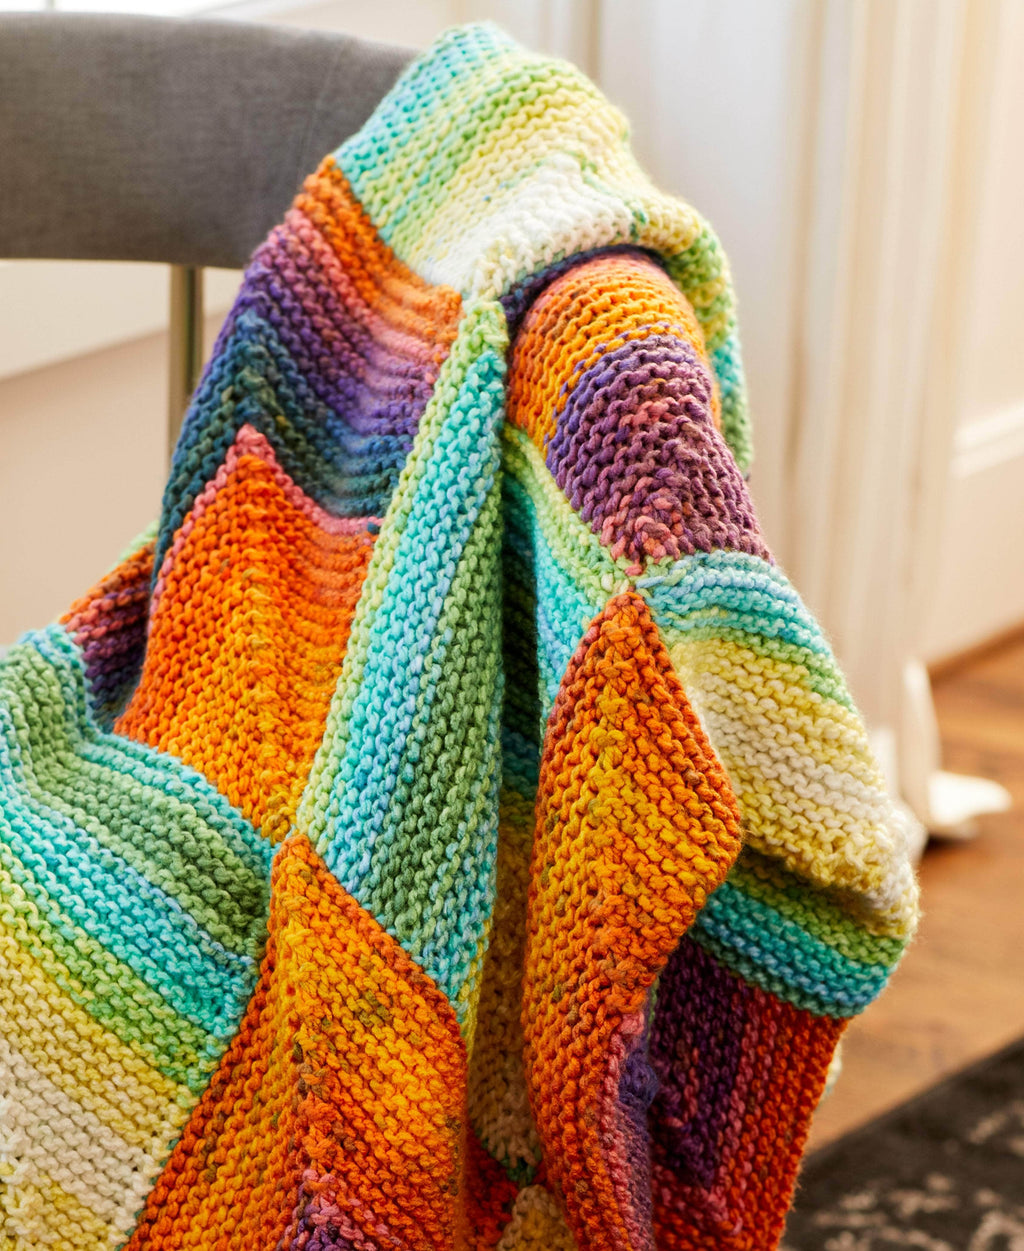 Premier Yarns - Have you tried Premier Puzzle? Each ball is made with 4  coordinating colors that combine to create ever-changing, softly blended  stripes. Pattern: Cheyenne Chevron Throw #crochet Yarn: Premier Puzzle